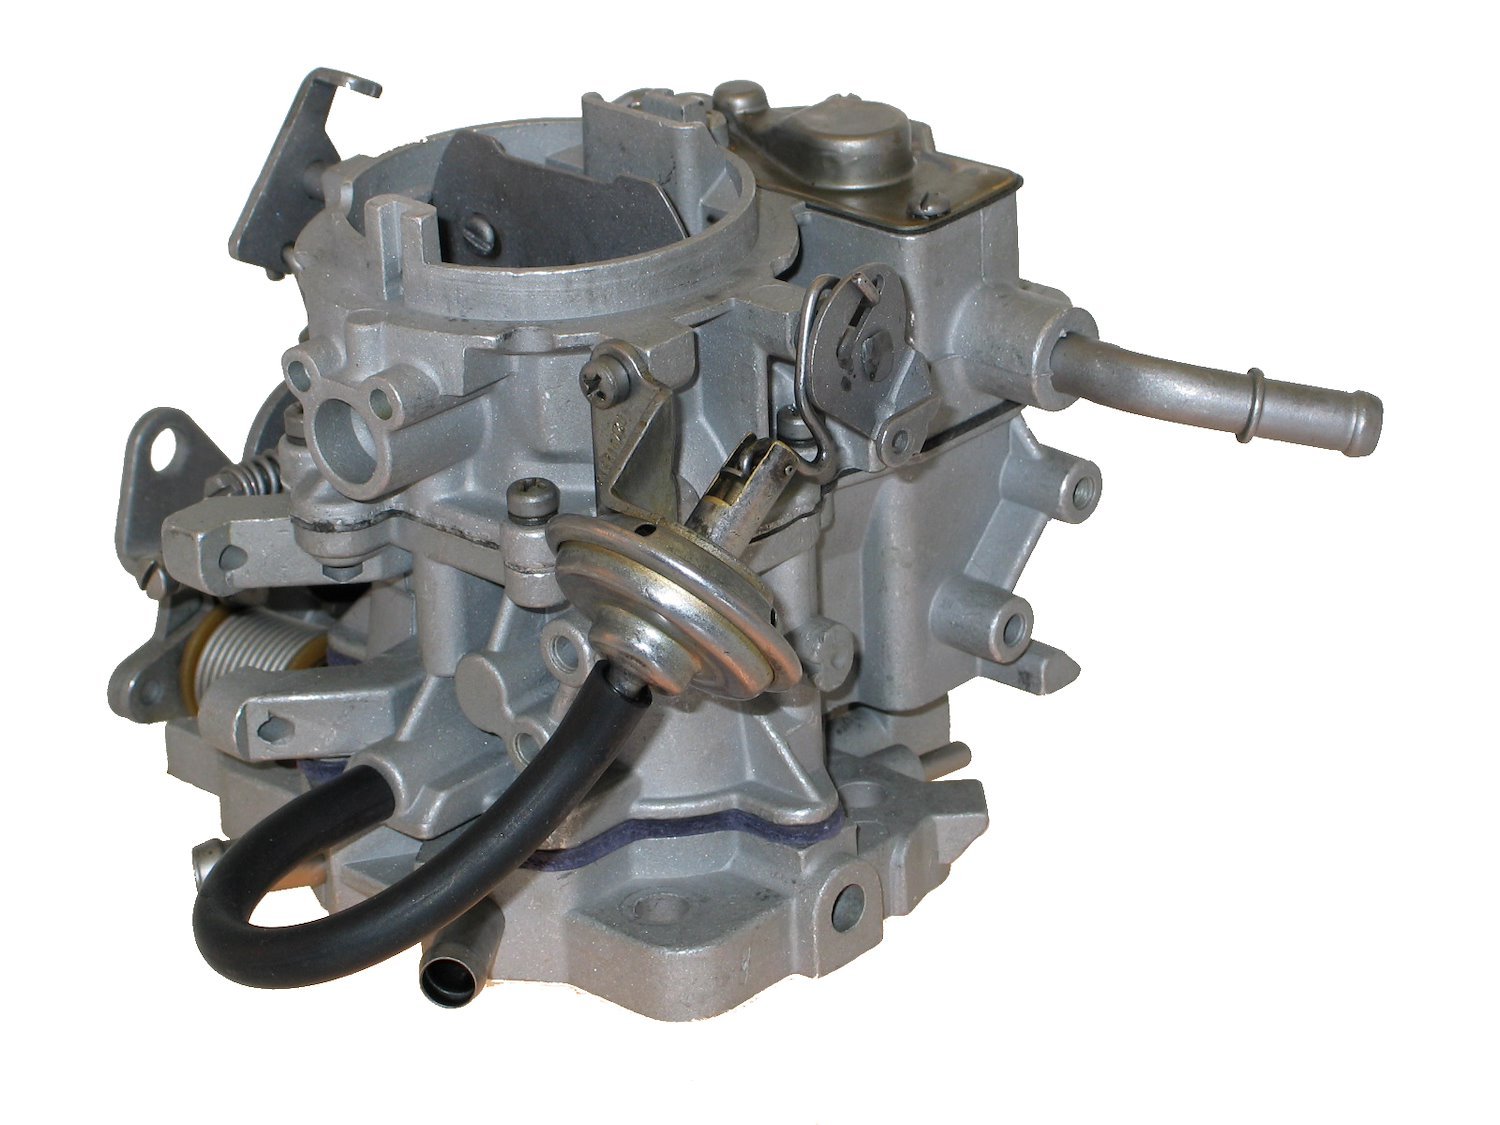 6-6332 Holley Remanufactured Carburetor, 2280, Light Duty-Style